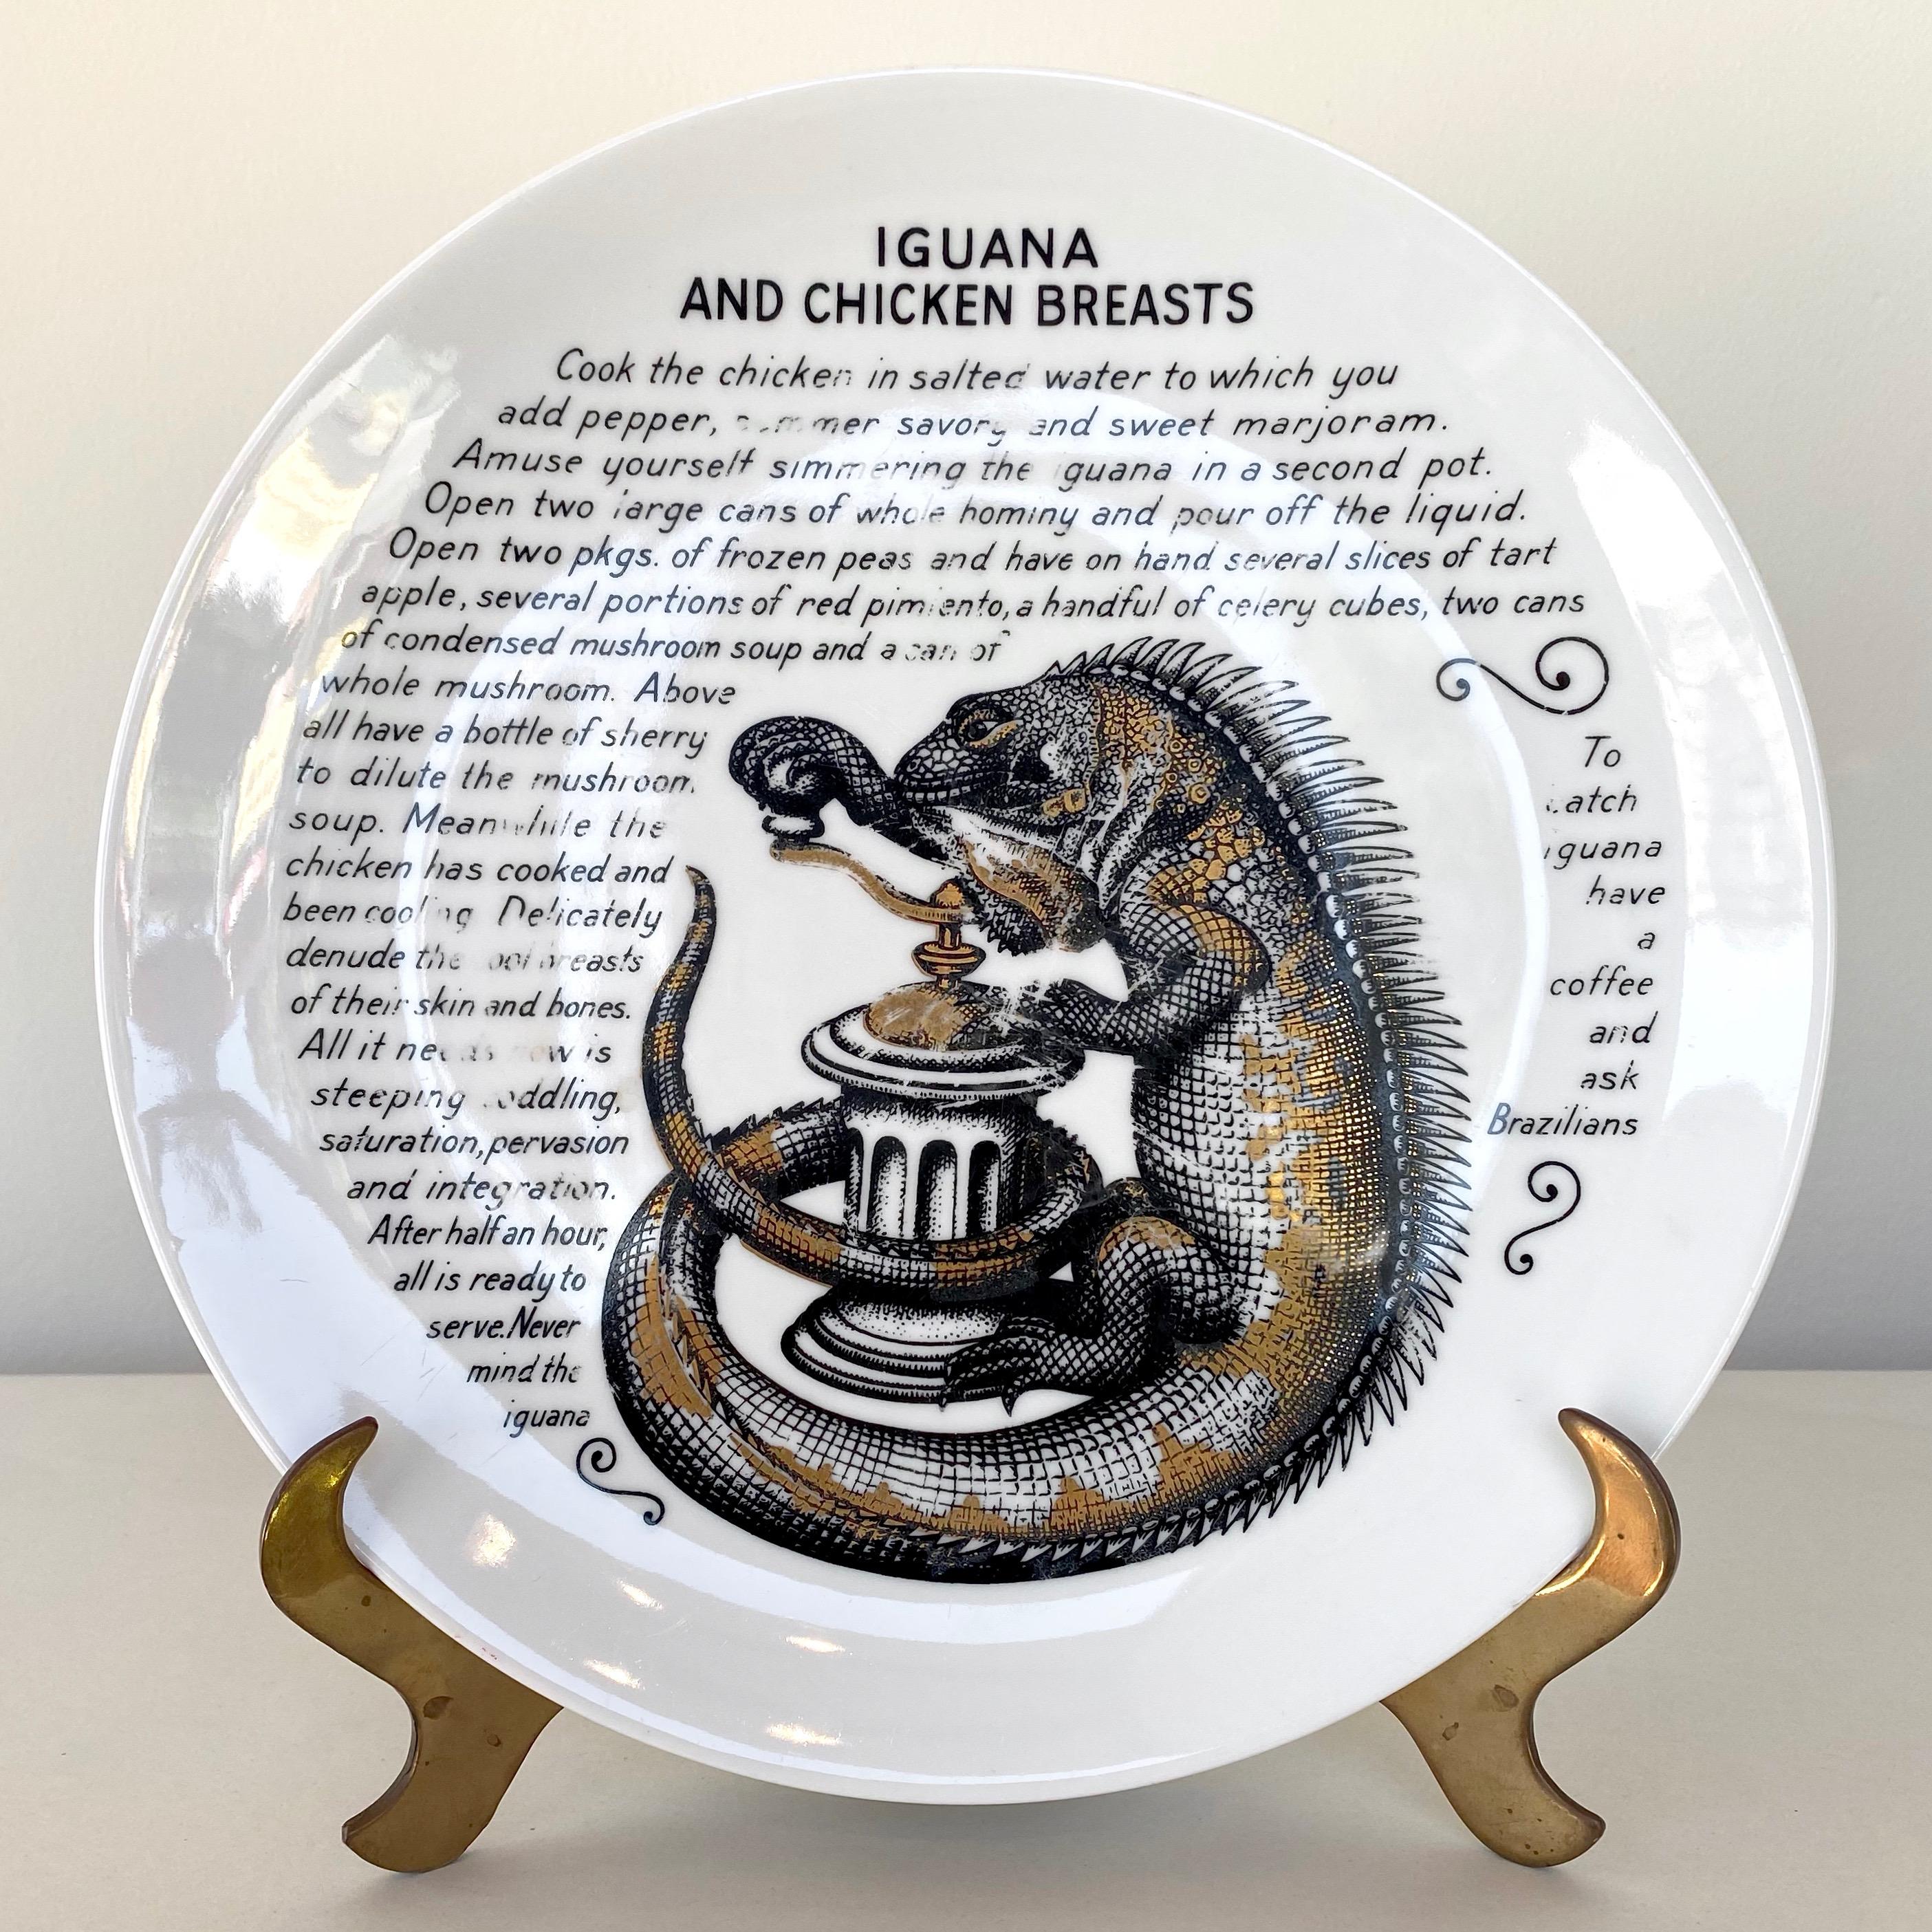 Gilt Fornasetti for Fleming Joffe “Iguana and Chicken Breasts” Recipe Plate, 1960s For Sale